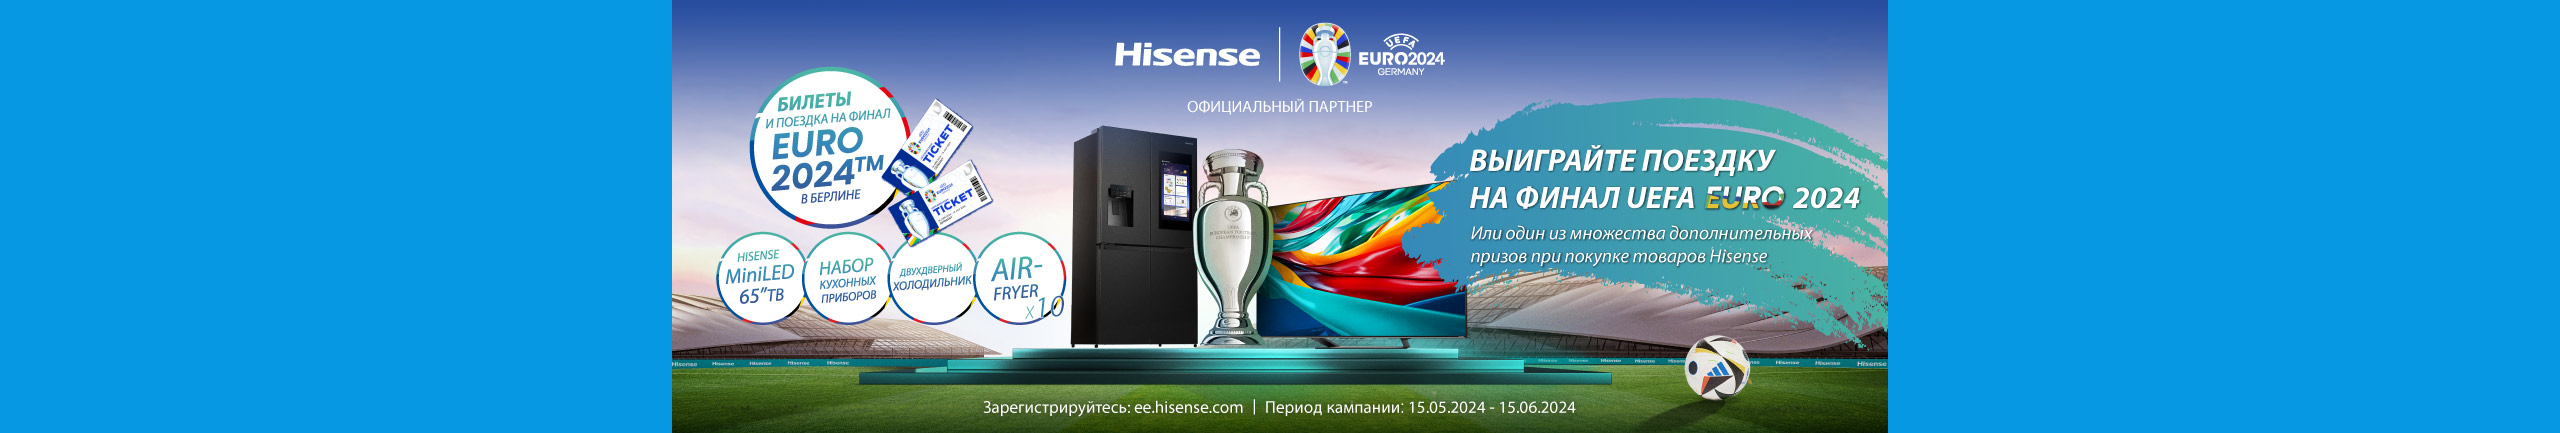 Buy selected Hisense products and win a trip to the UEFA EURO24 final!